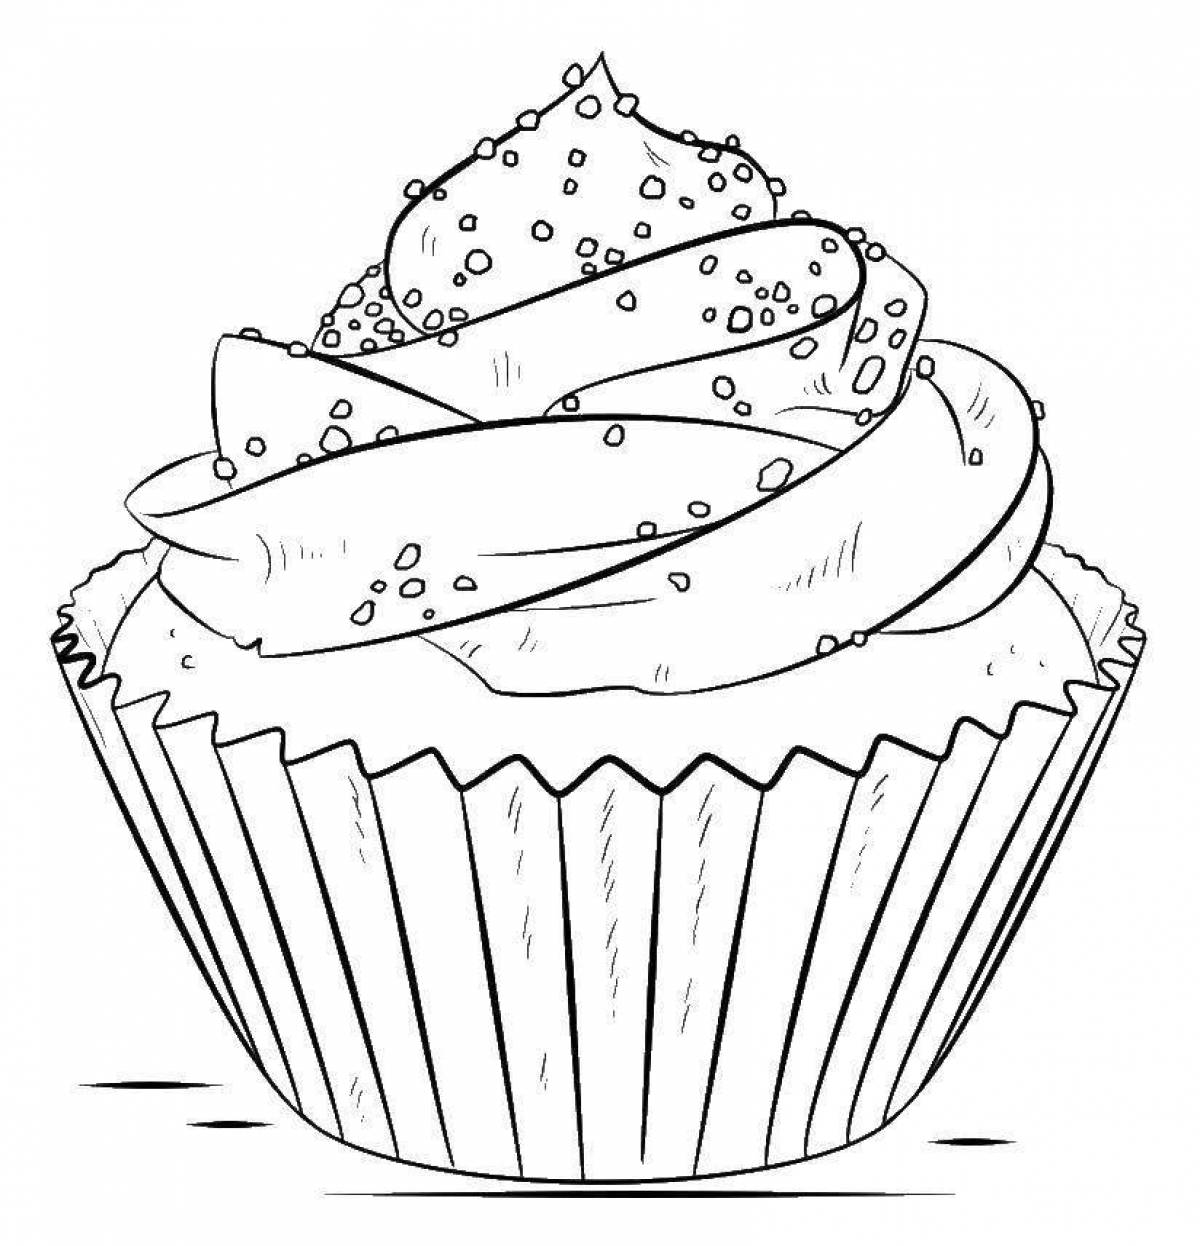 Decorated cake coloring book